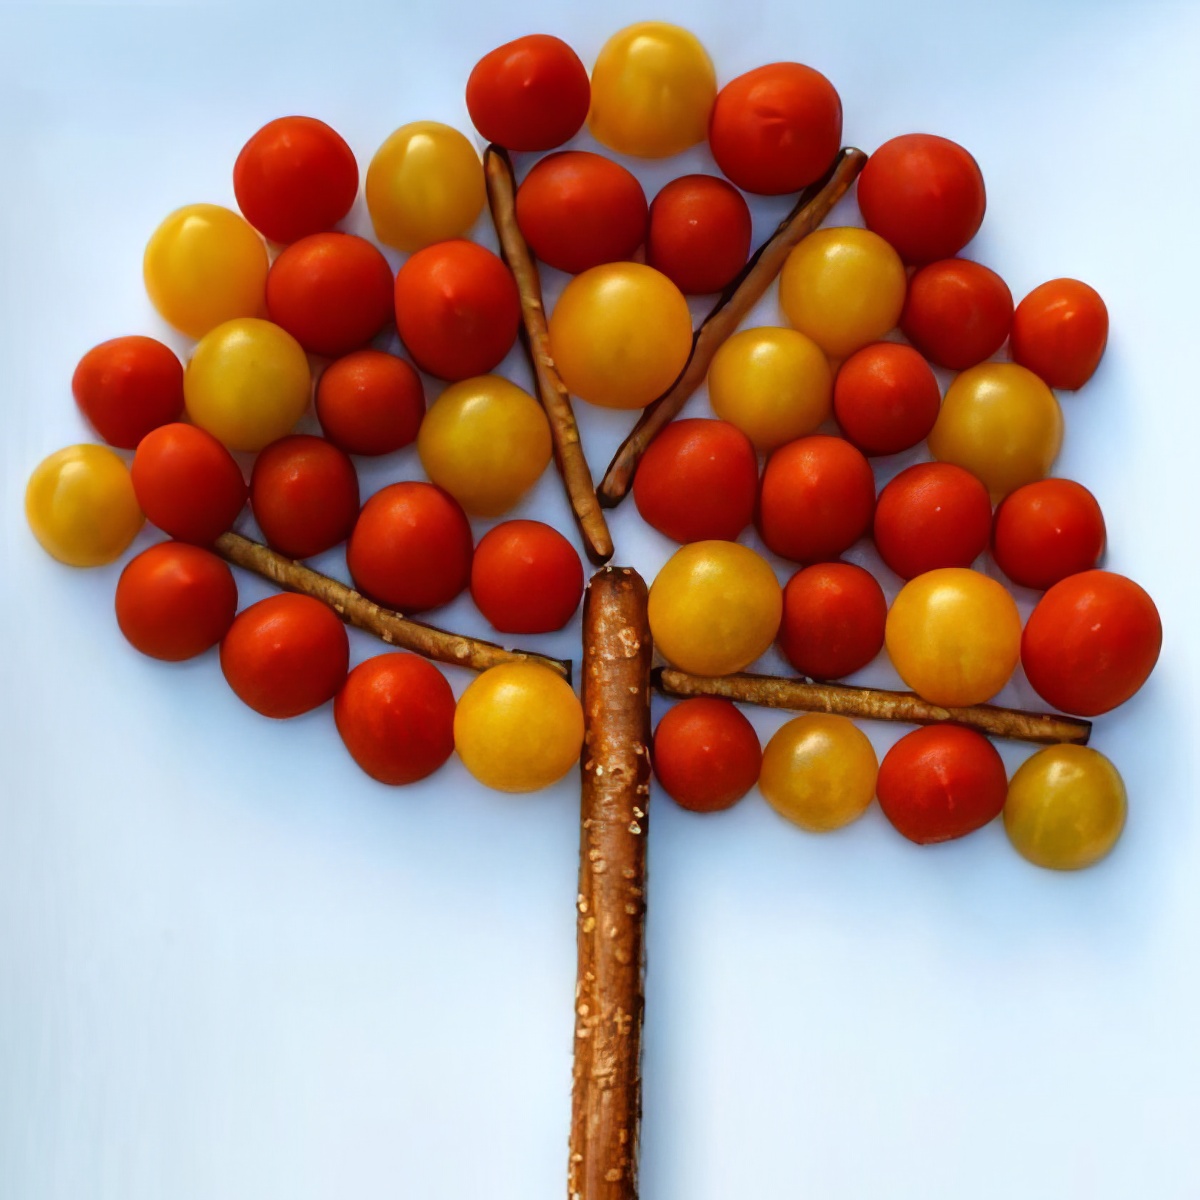 Have an afternoon delight with these super easy and yummy fall tree snack with your kids!